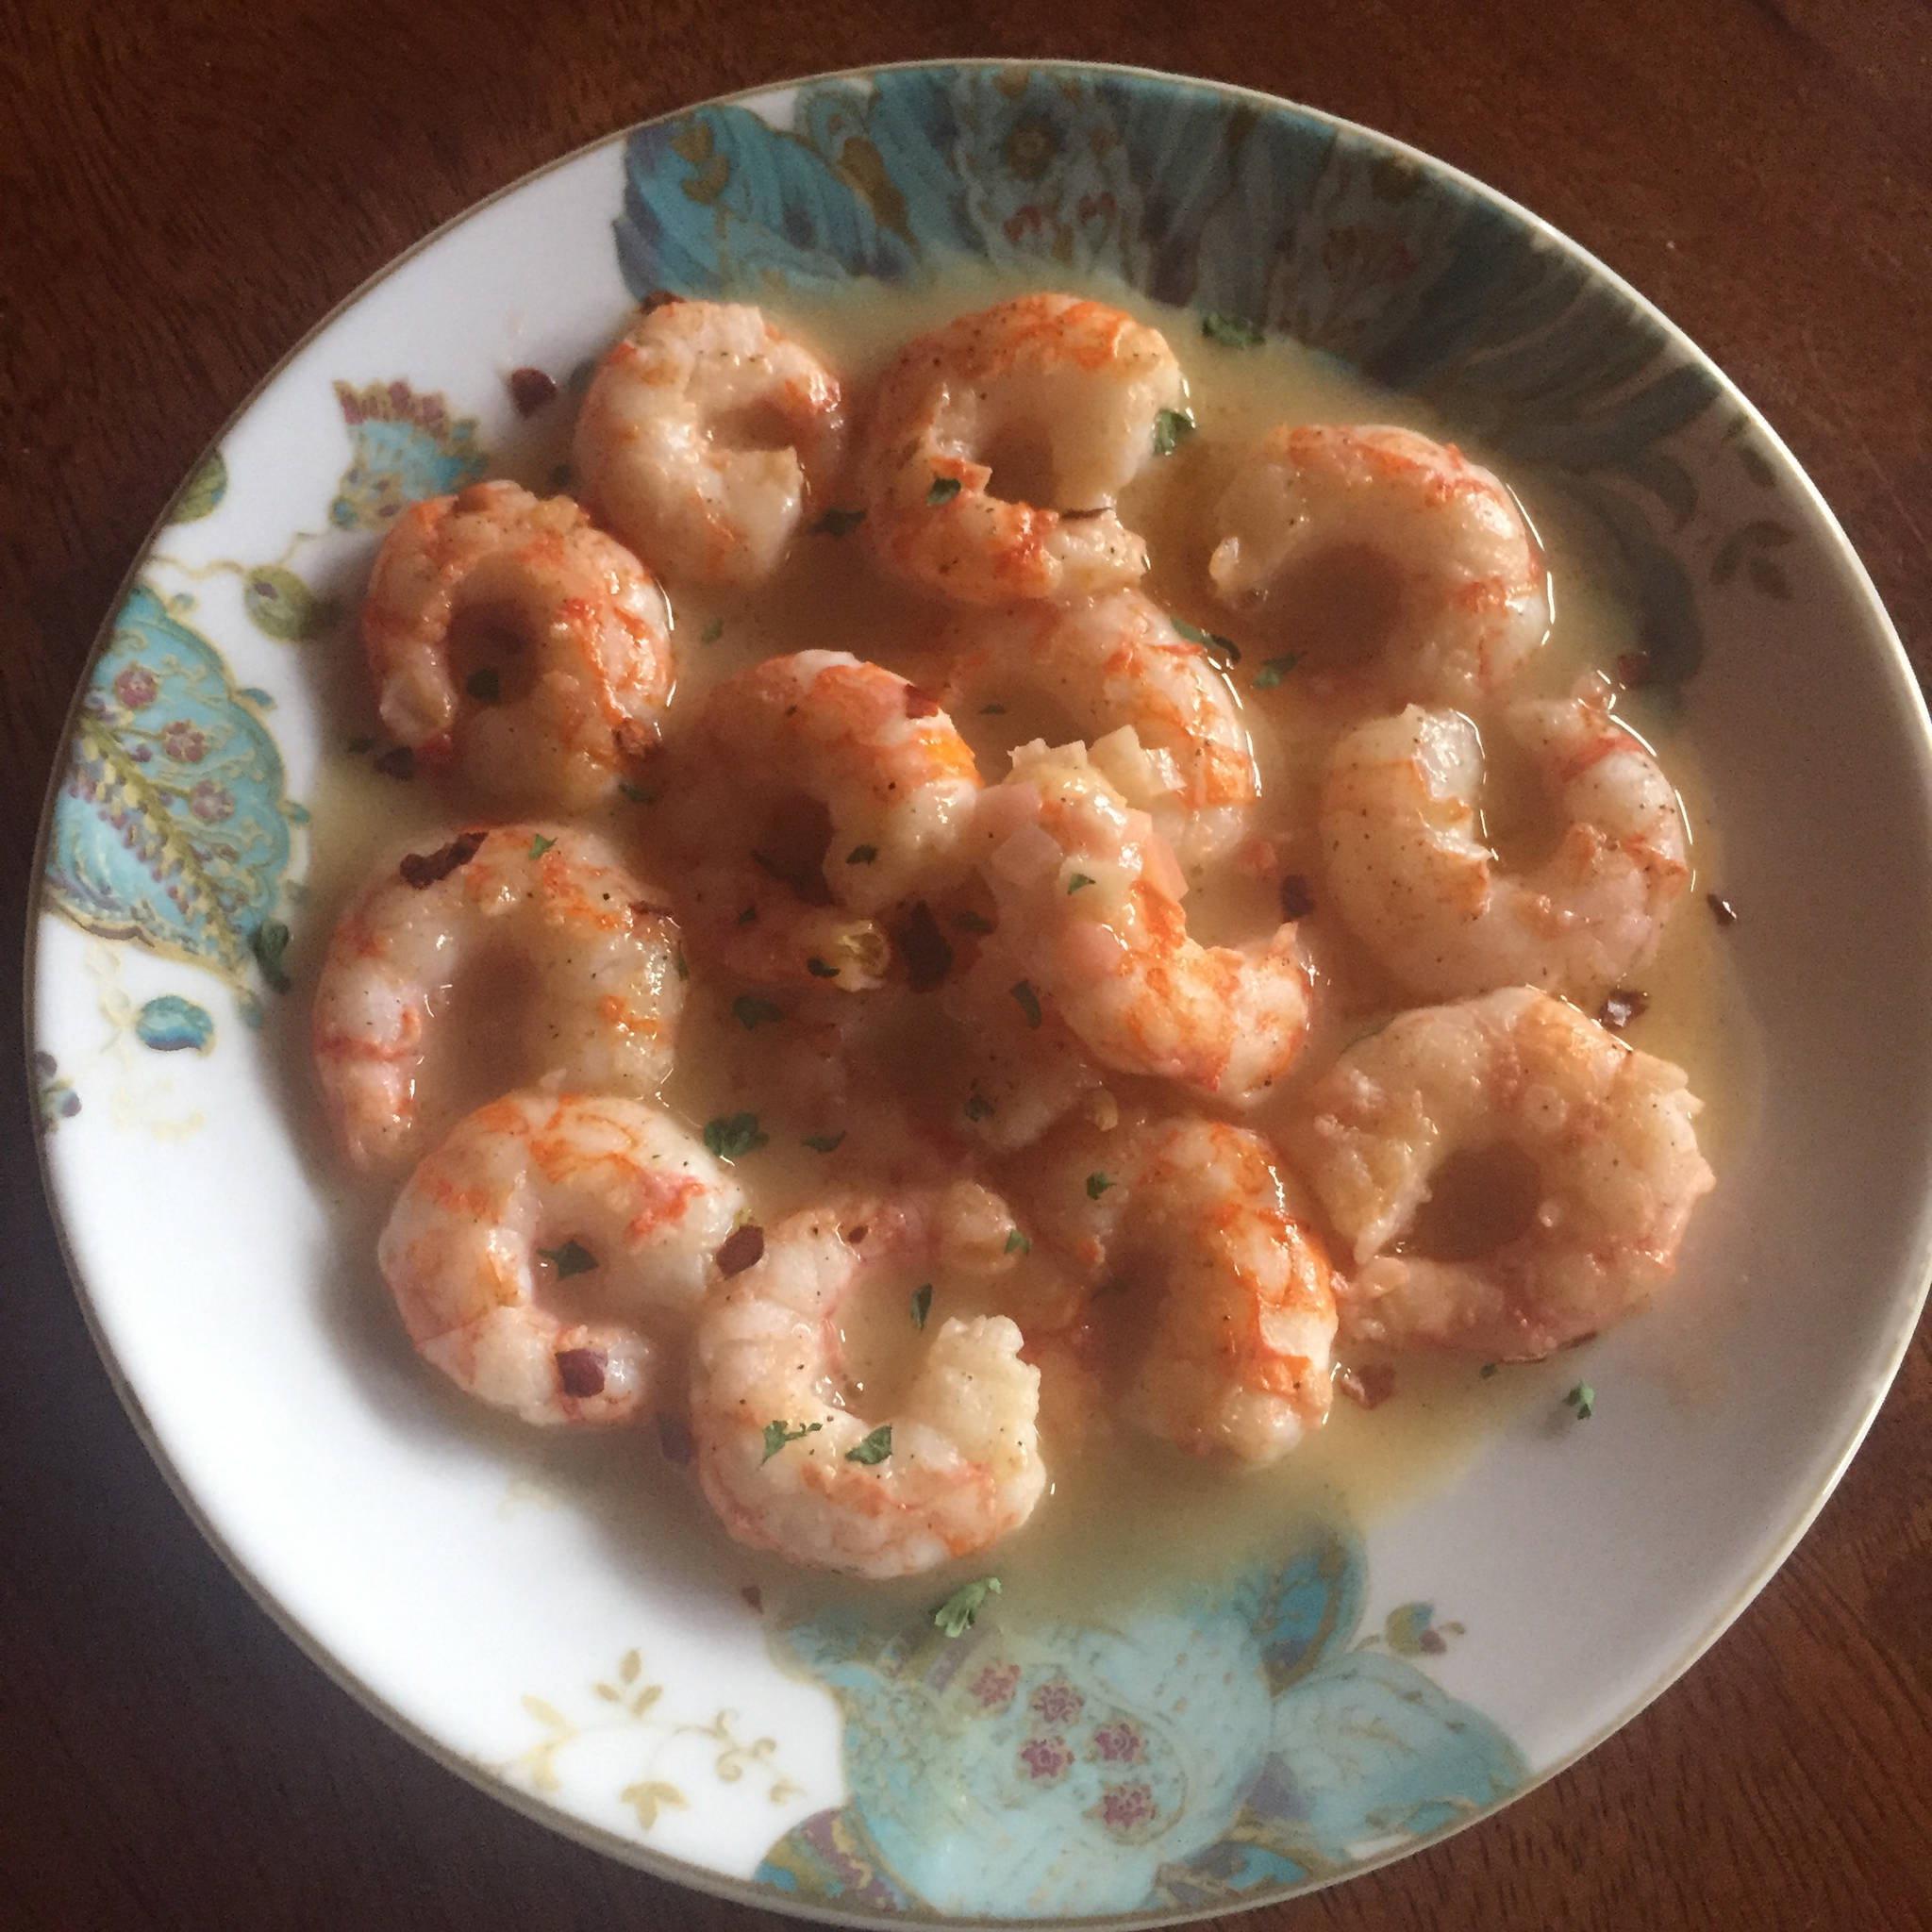 Prince William Sound Spot Shrimp with Champagne Ginger Butter Sauce is the perfect recipe to start off the traditional start of summer, as seen here in Teri Robl’s kitchen on May 28, 2019, in Homer, Alaska. (Photo by Teri Robl)